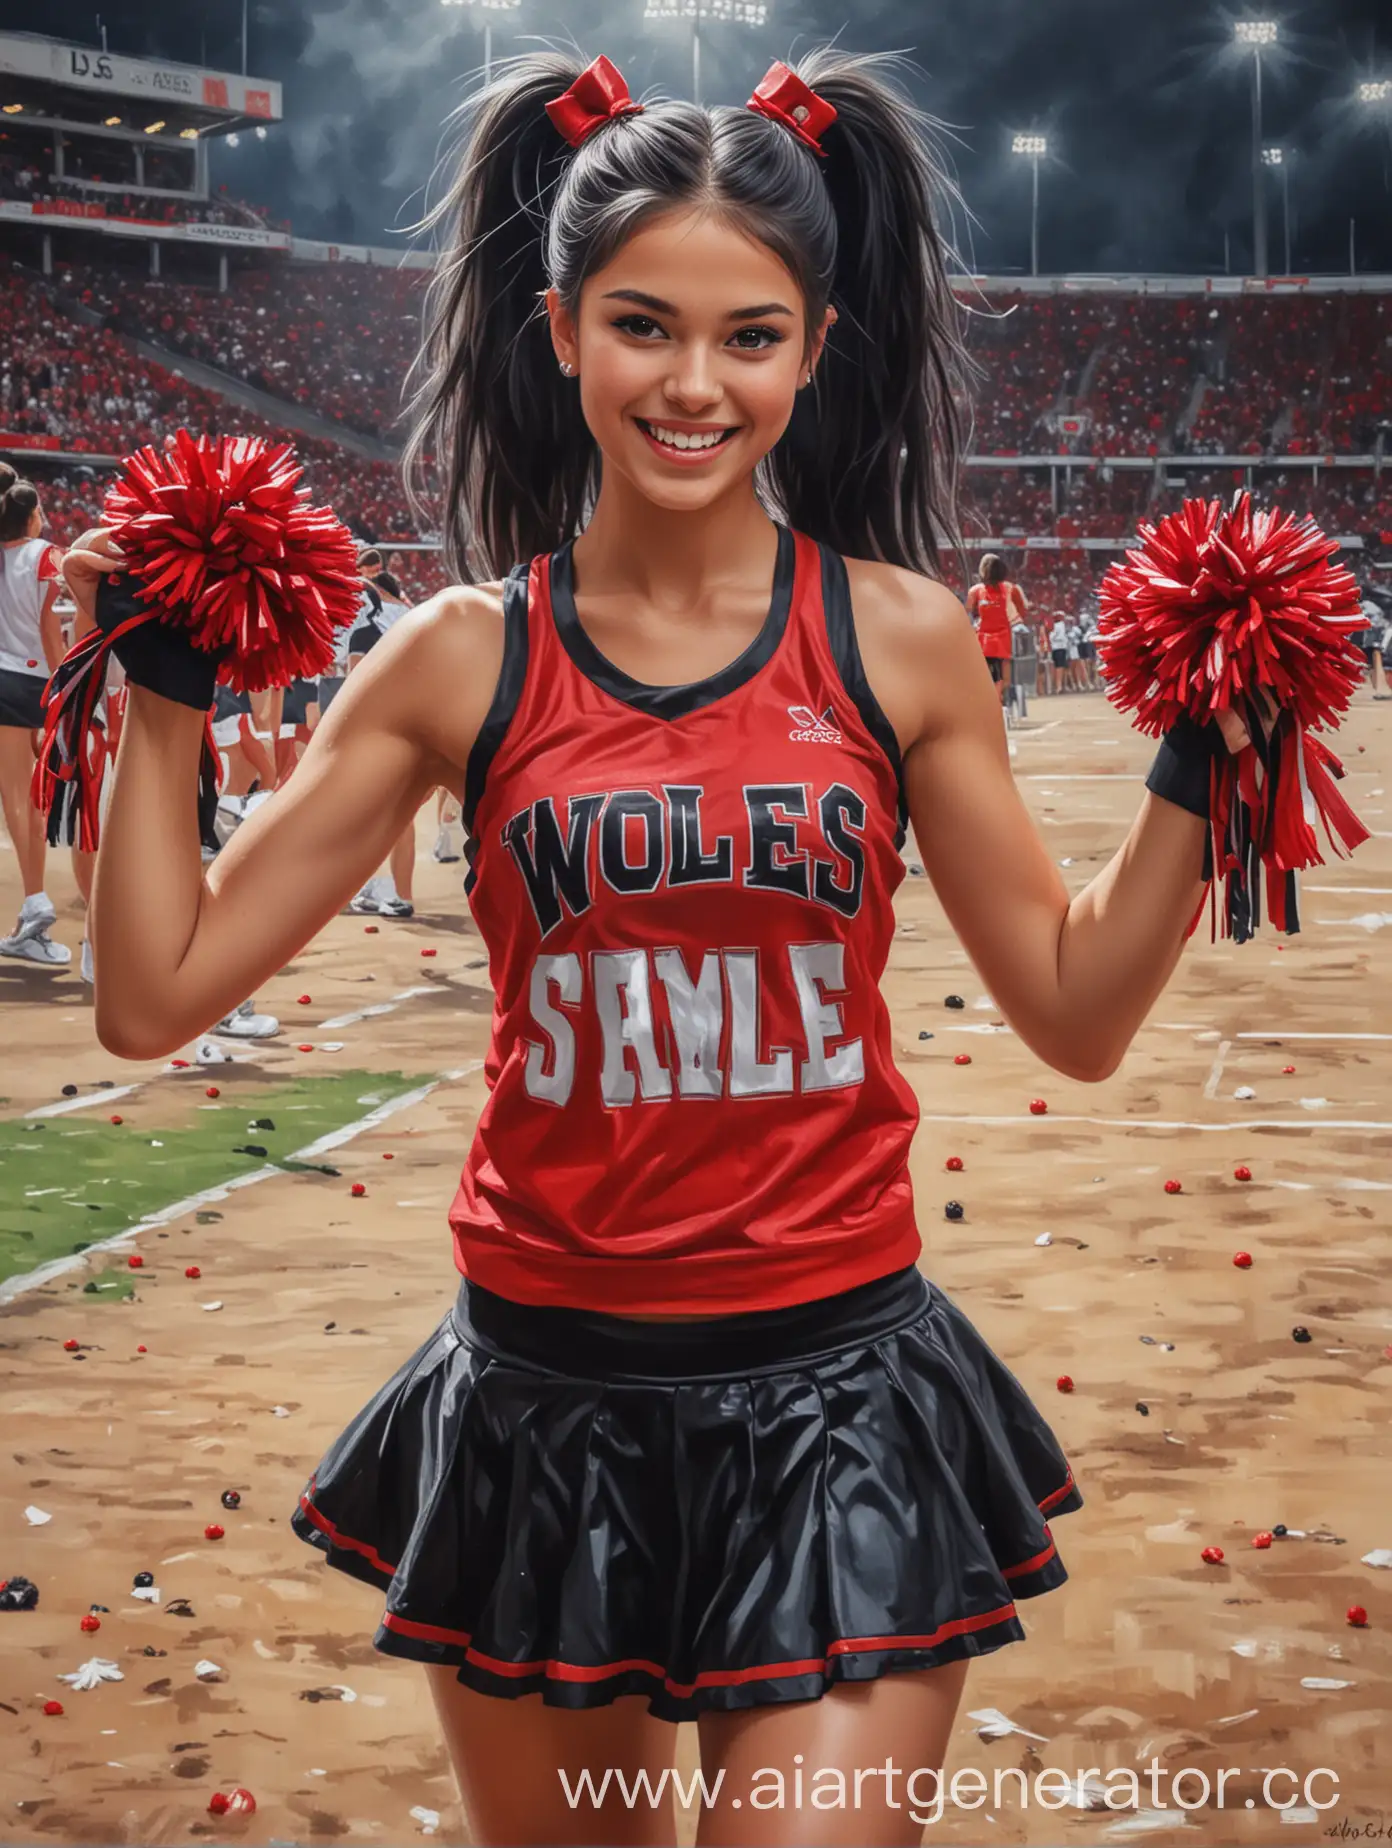 Vibrant-Oil-Painting-of-a-Cheerleader-in-Wolves-Attire-with-PomPoms-at-Stadium